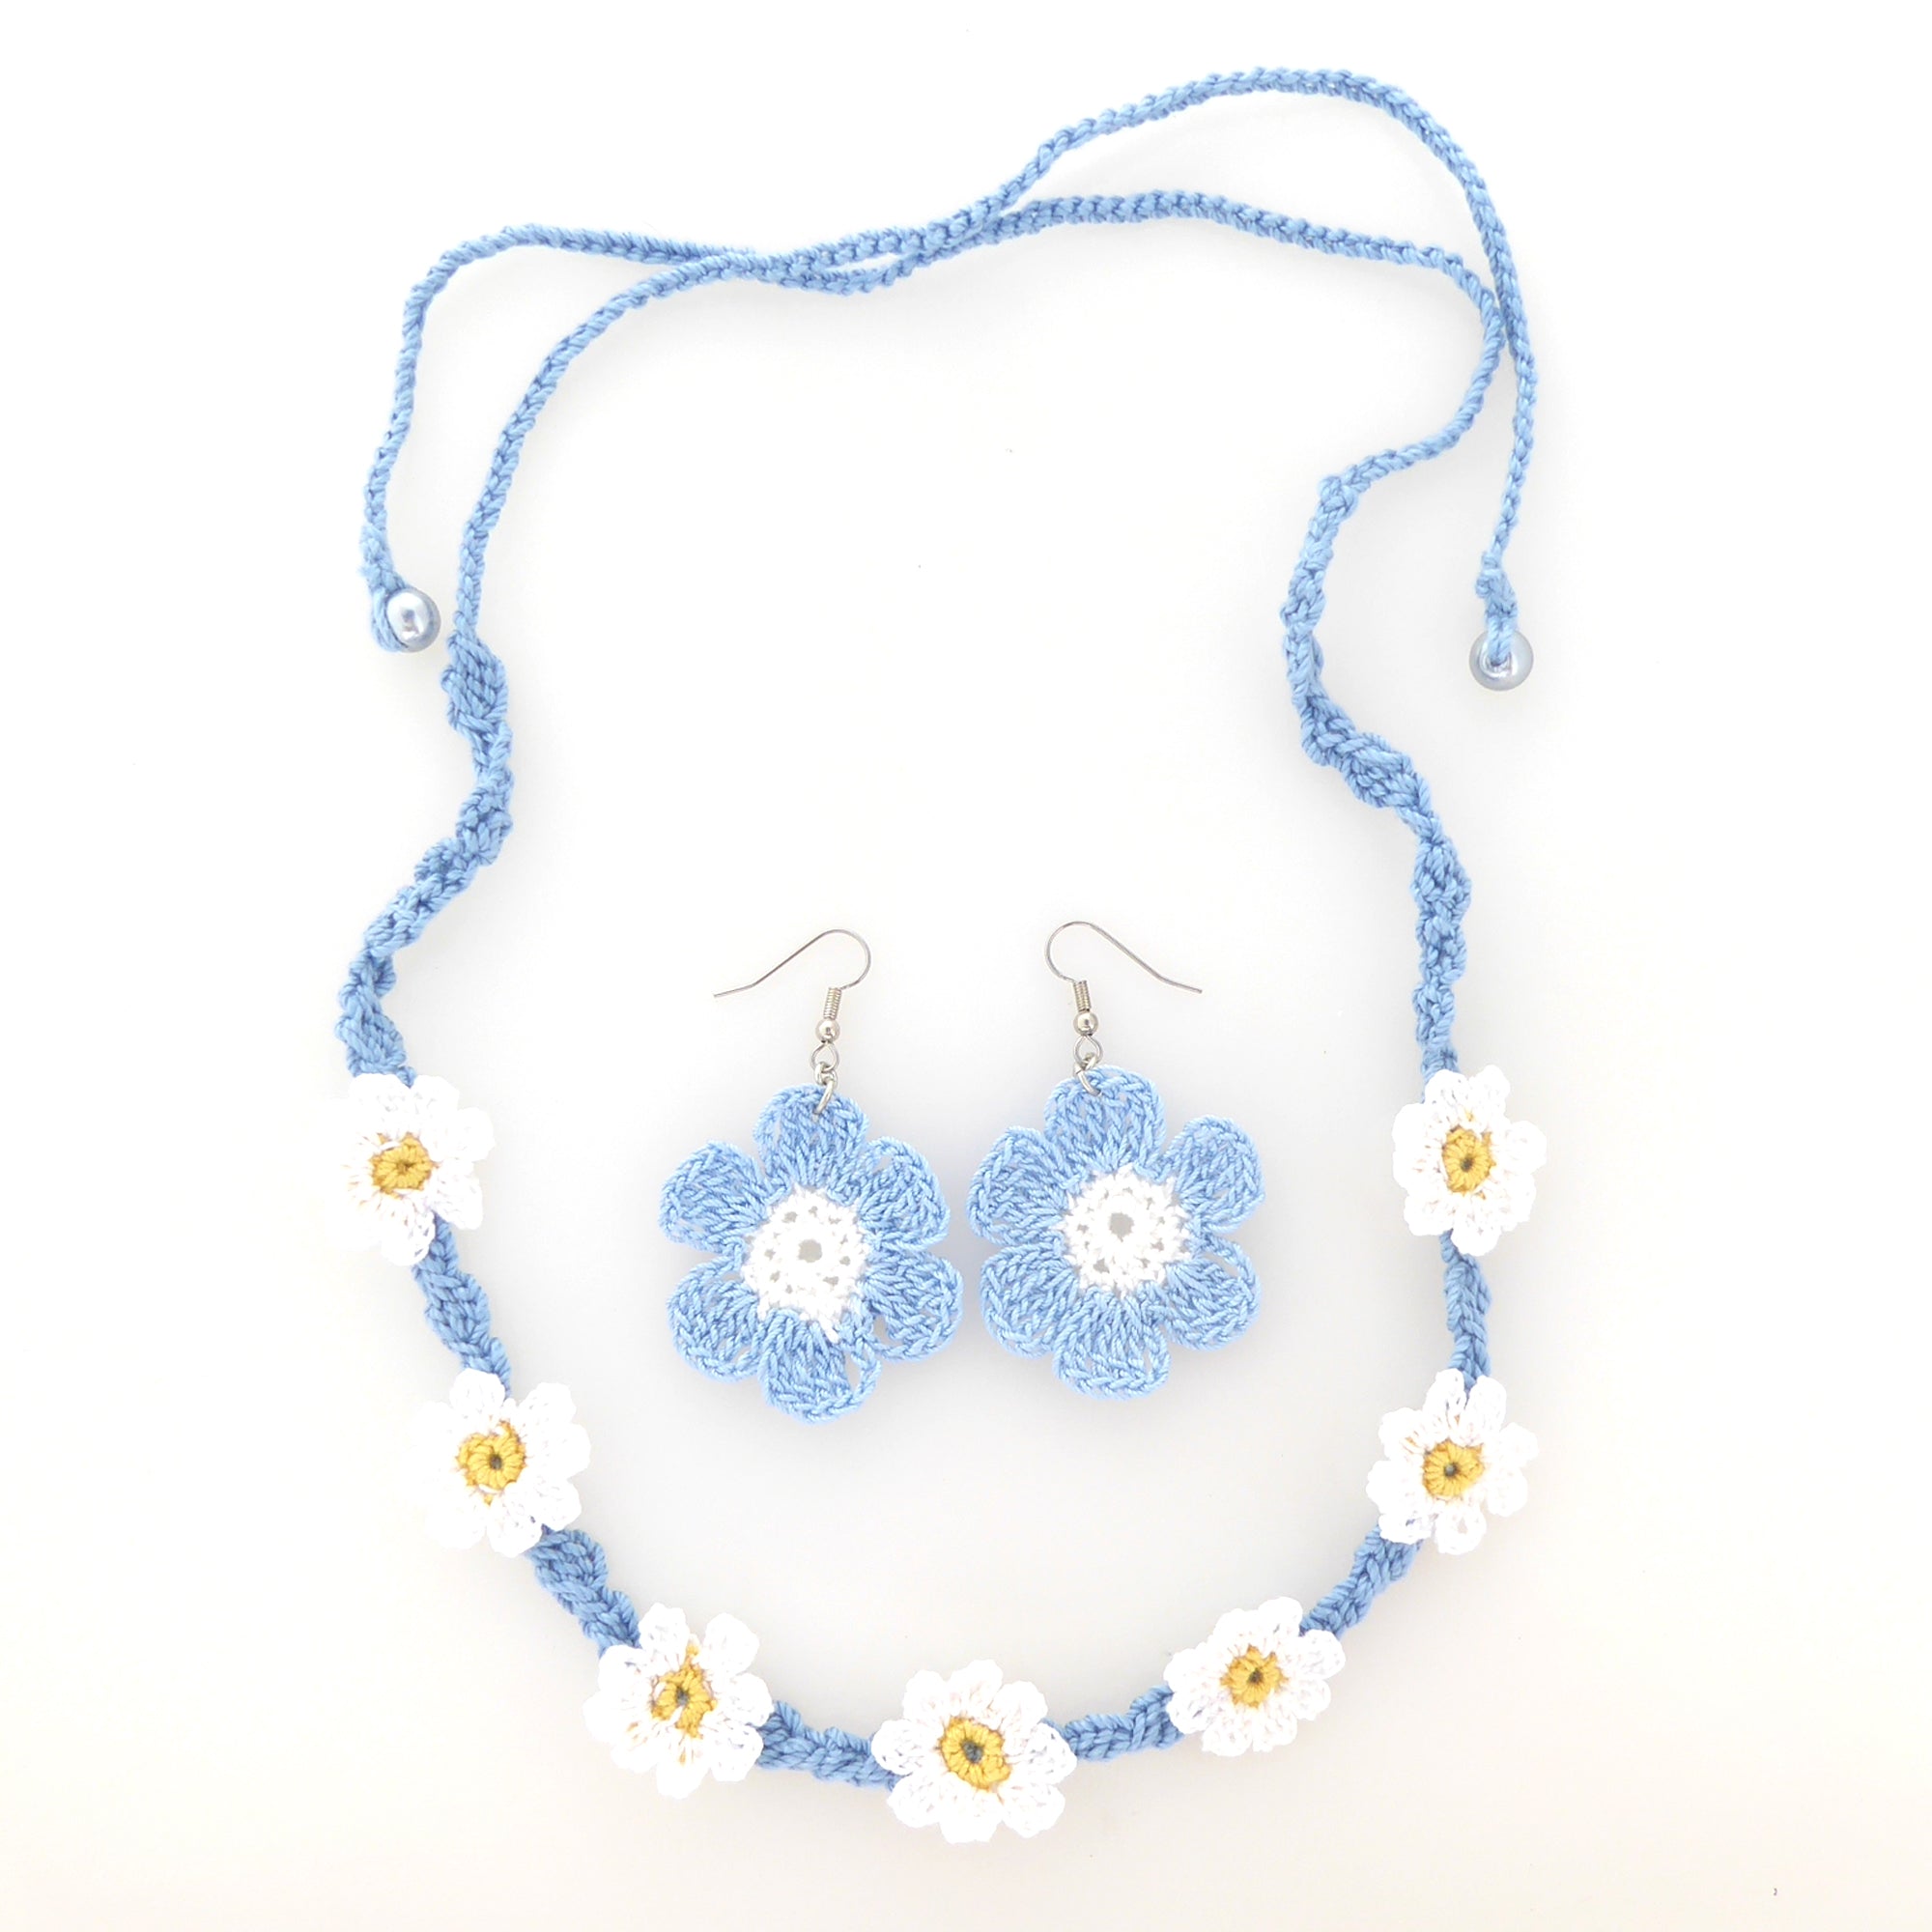 Blue and white flower crochet earring and necklace set by Jenny Dayco 6